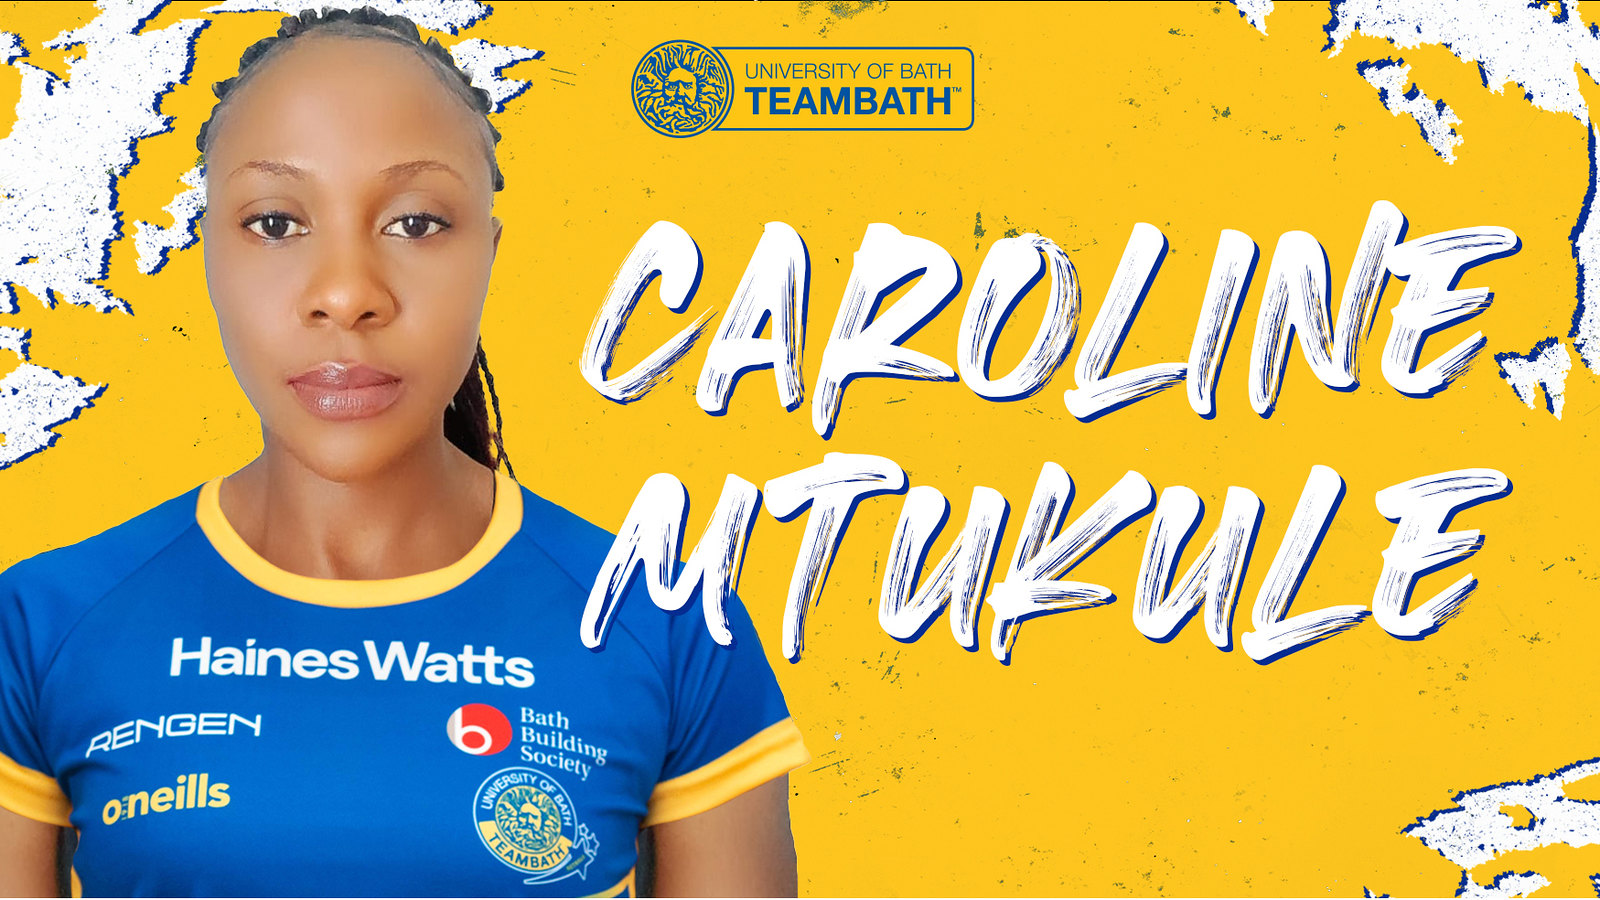 A graphic featuring new Team Bath Netball signing Caroline Mtukule